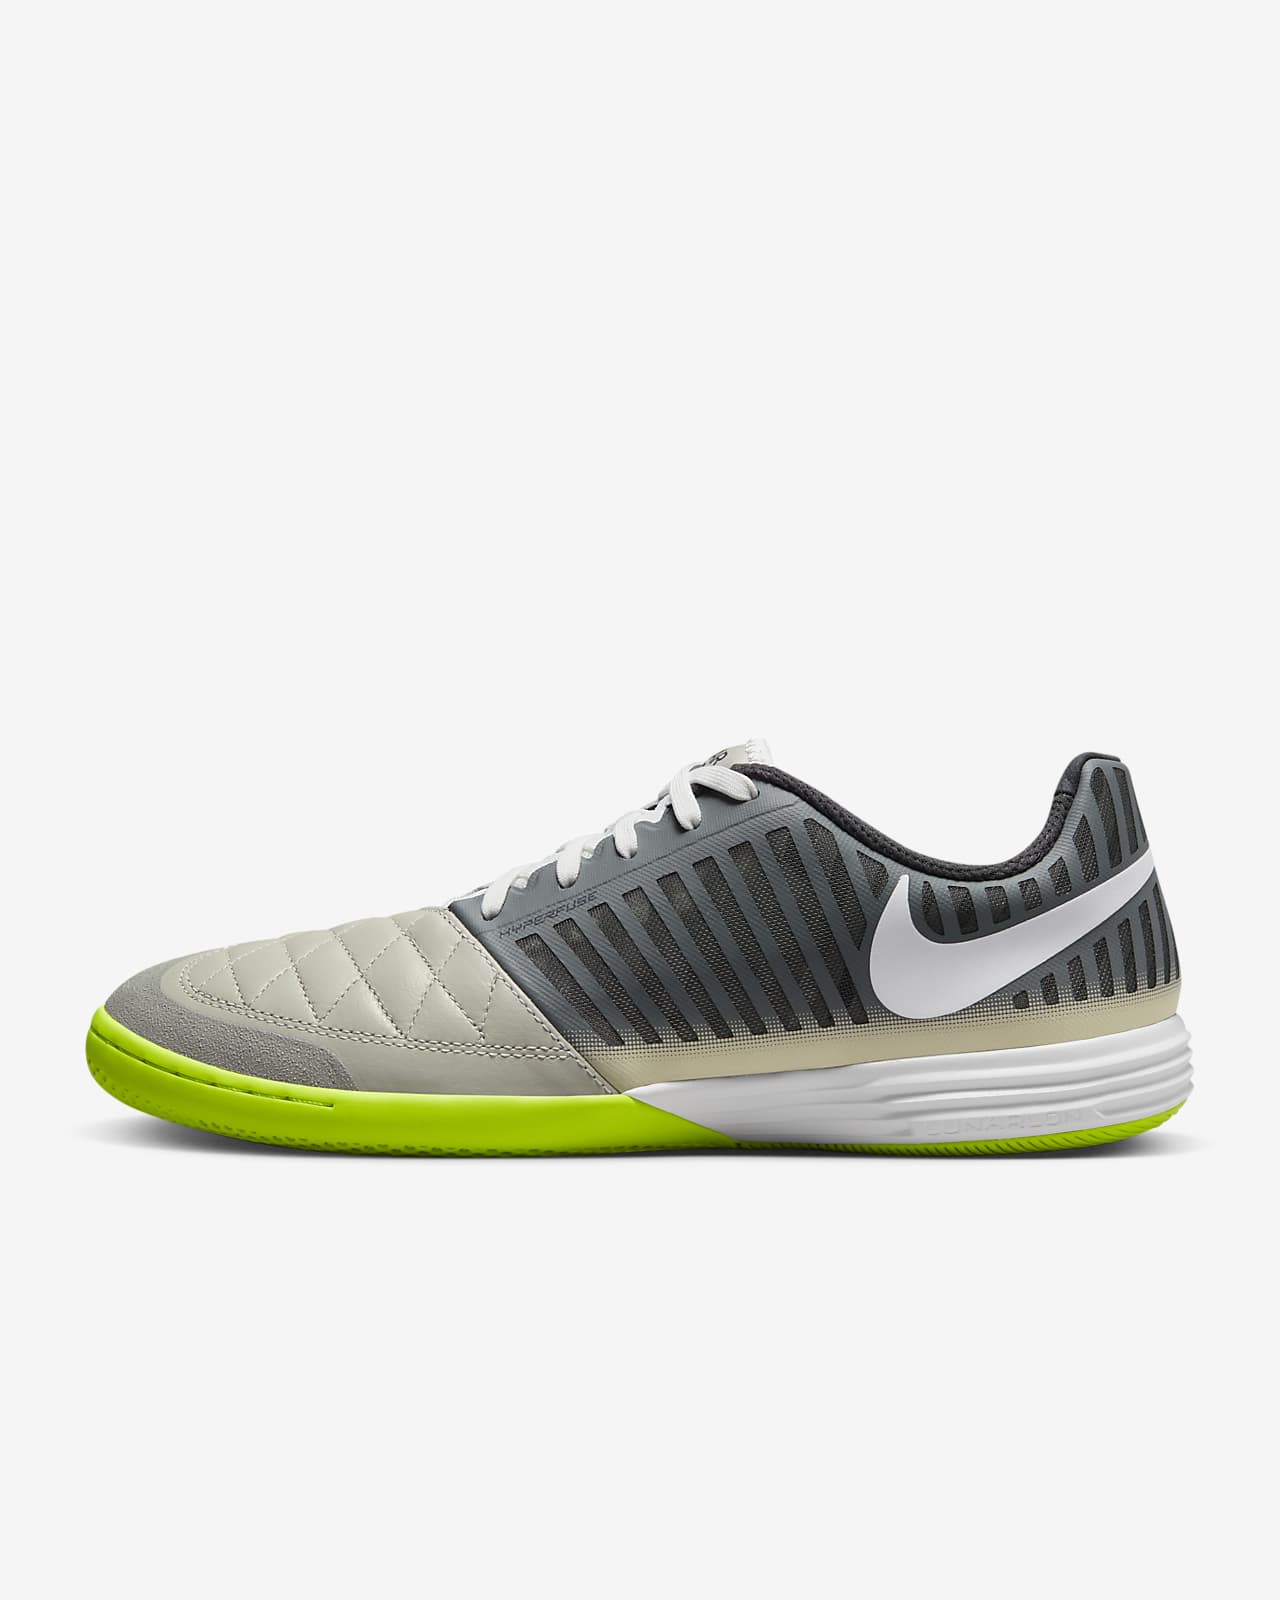 Lunar Gato IC Indoor Court Shoes. ID